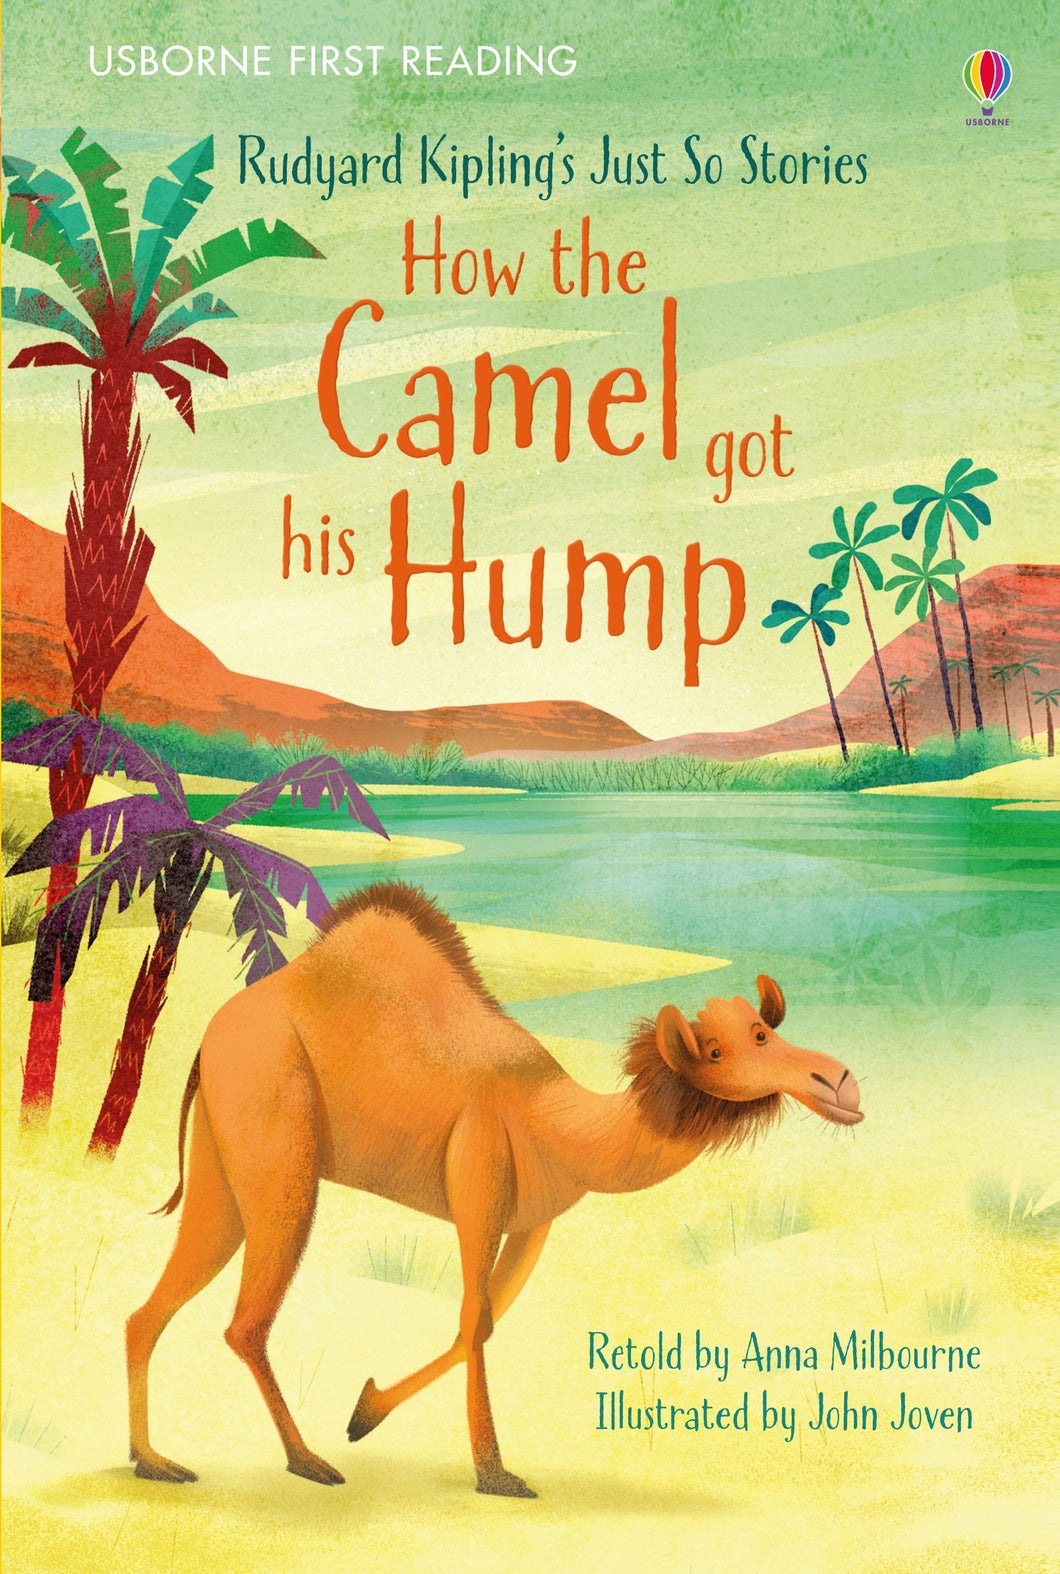 First Reading Level 1 - How the Camel got his Hump